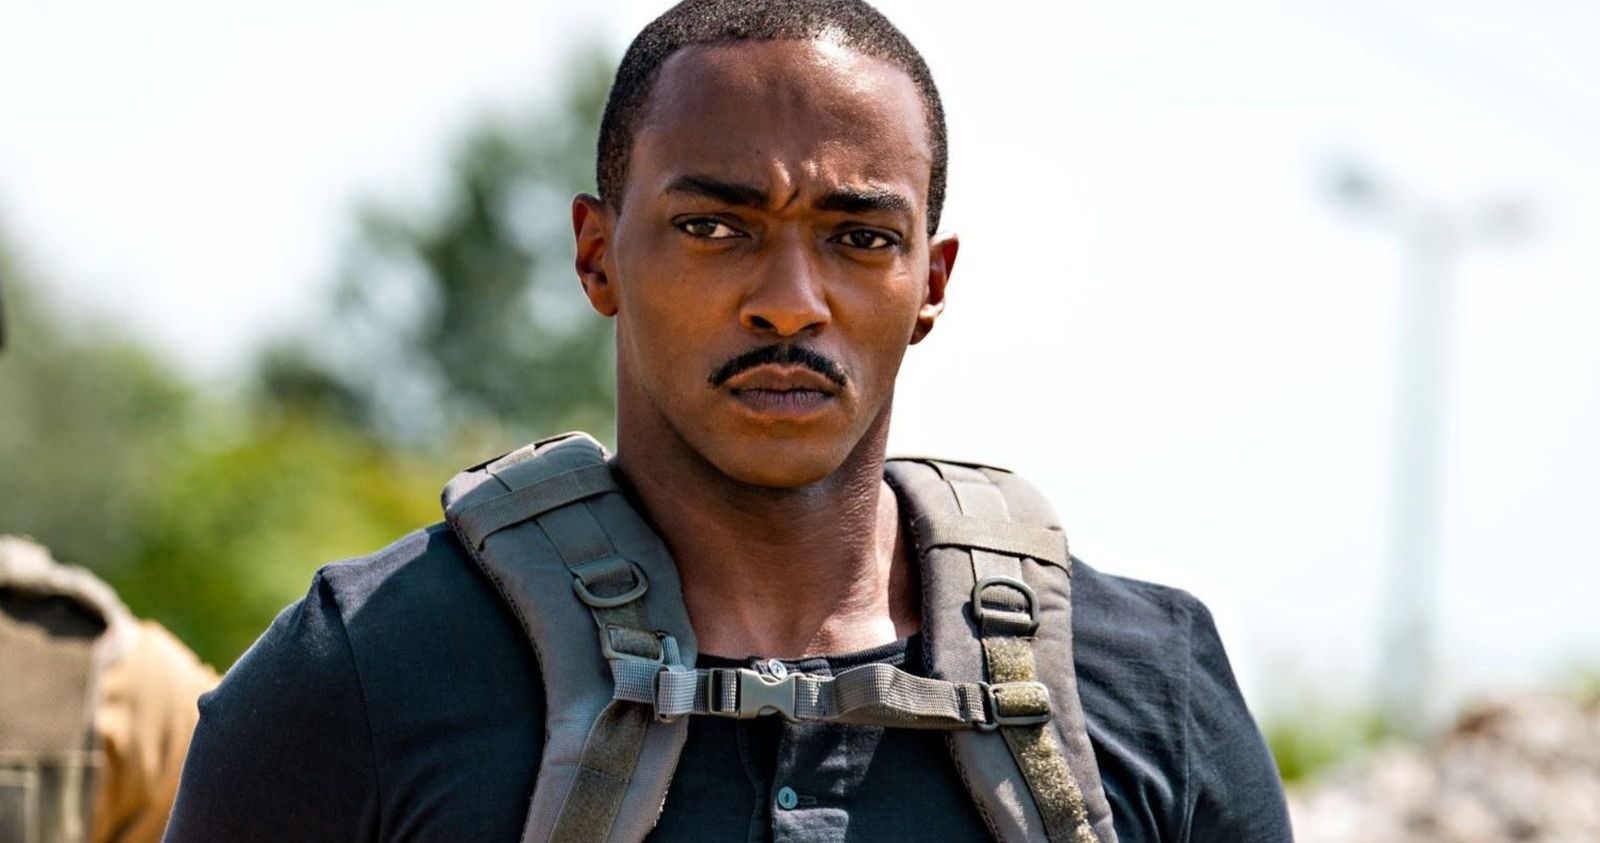 Twisted Metal' LIve-Action TV Series Sets Anthony Mackie To Star – Deadline